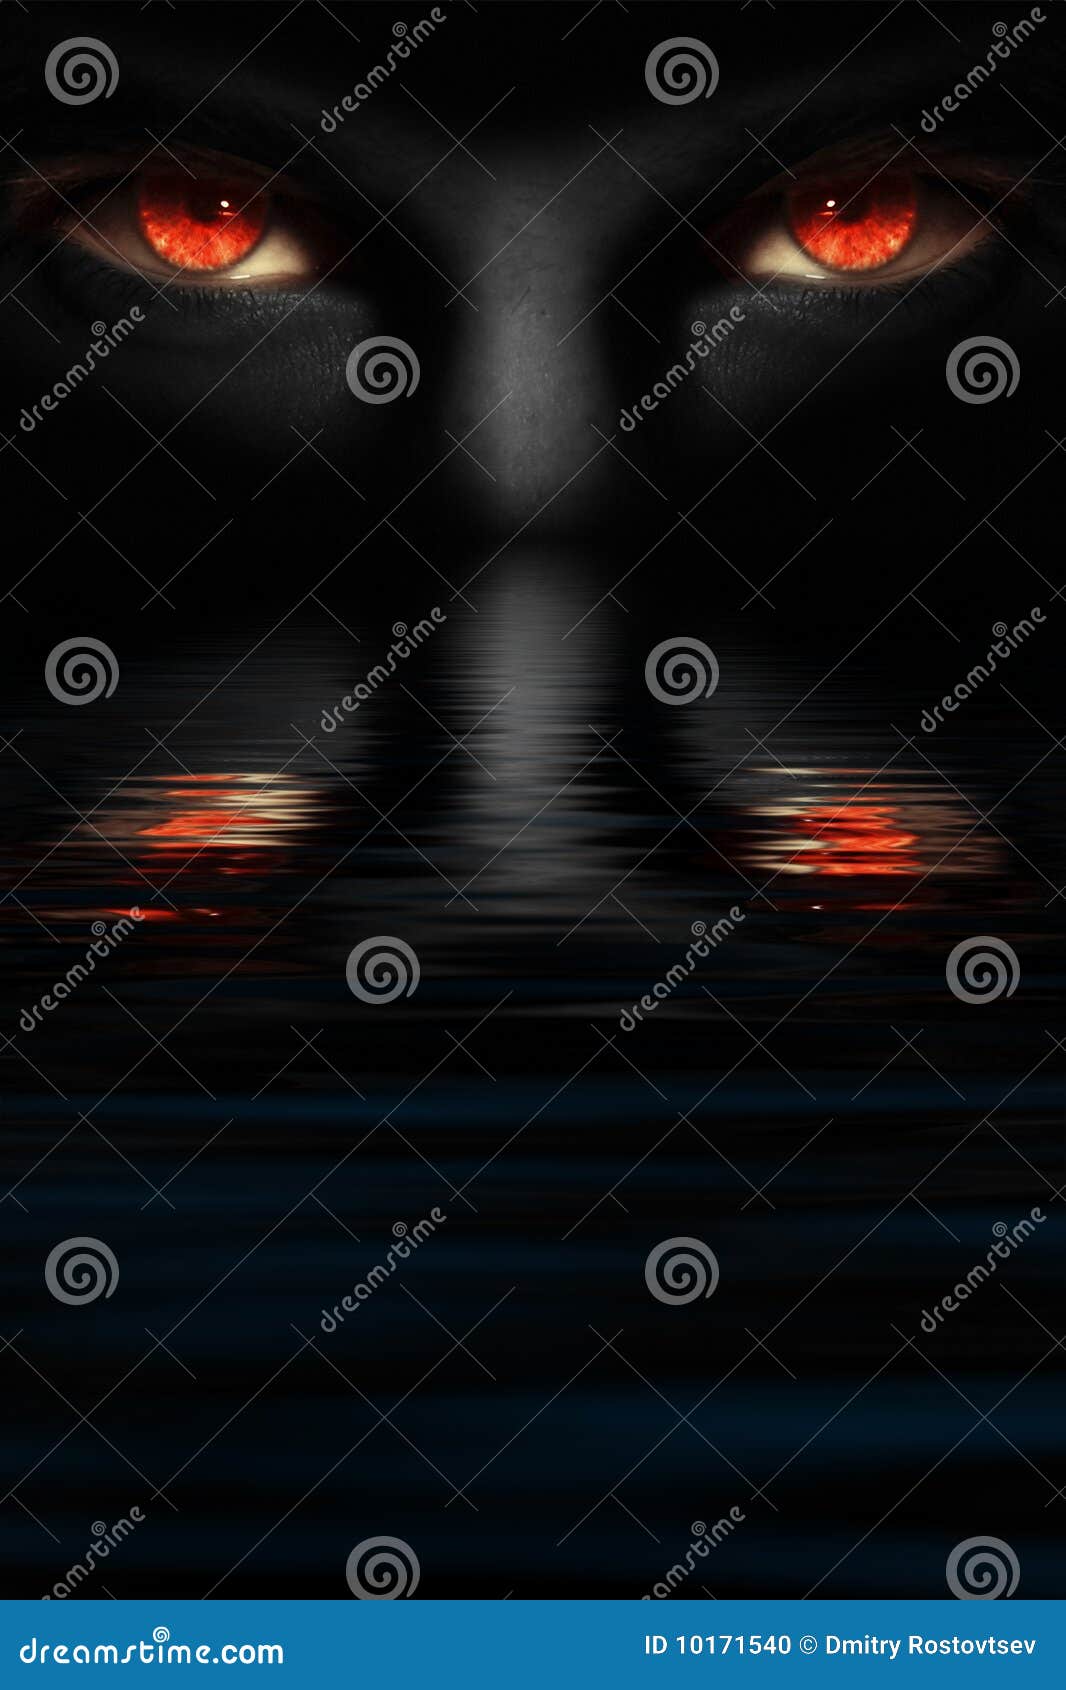 Devil s stock photo. Image of background, water 10171540